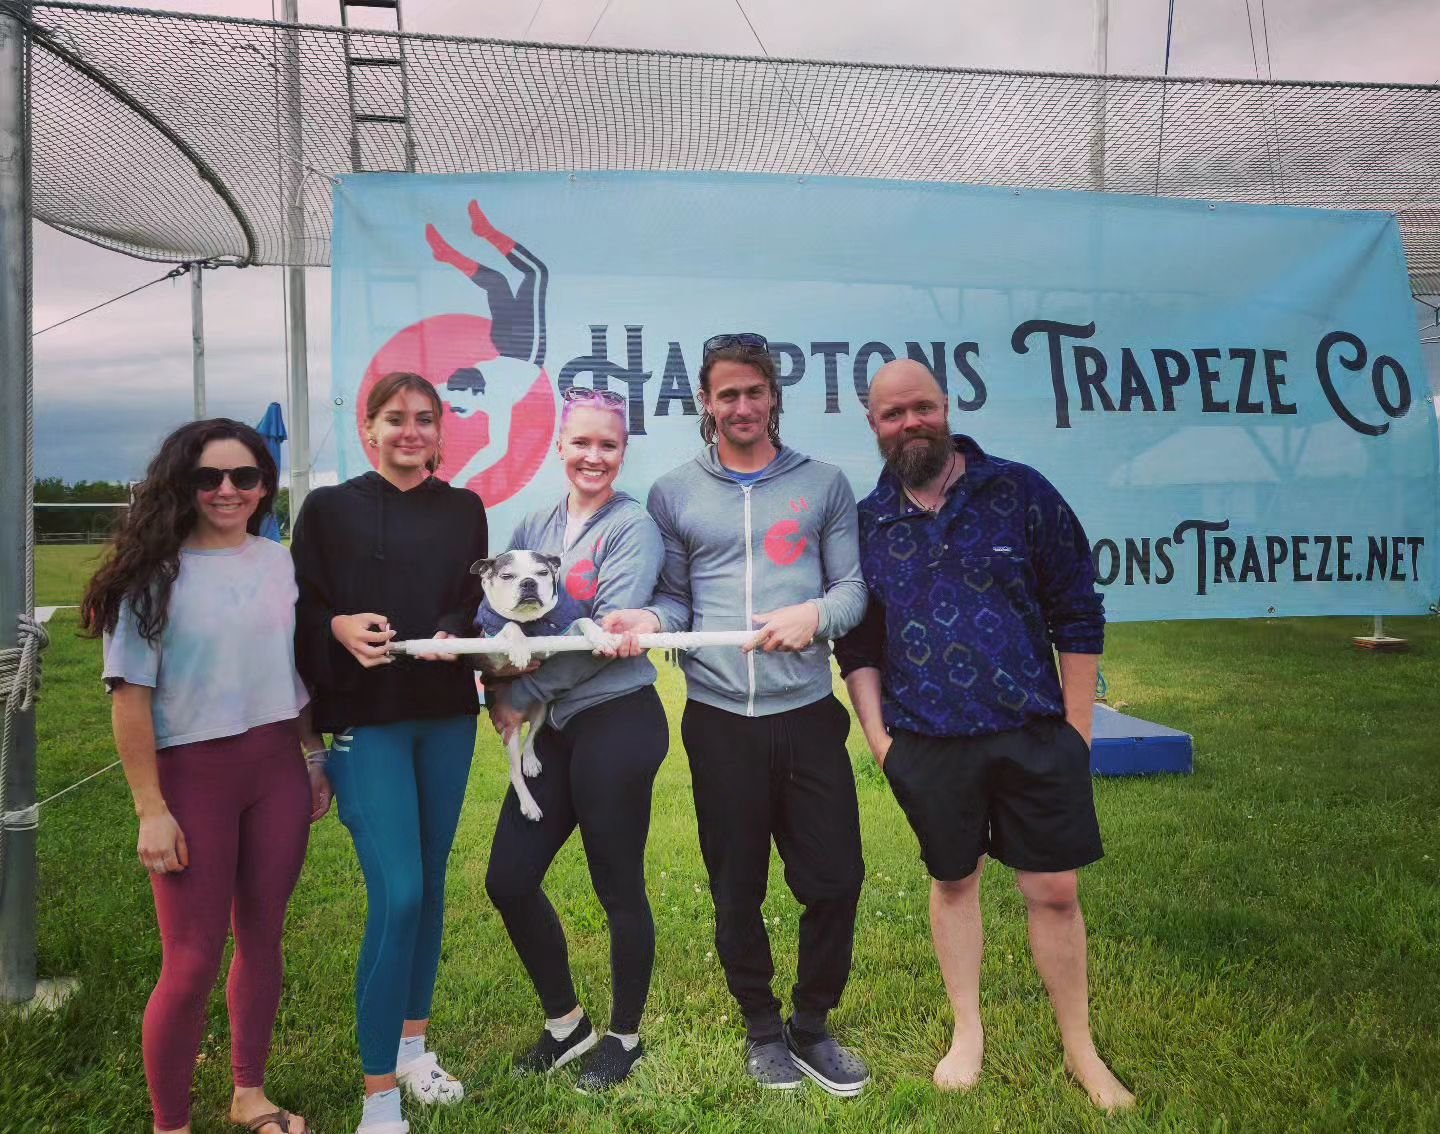 A HUGE shout-out to our frequent flyers coming out today for an awesome class and braving the cool June weather! You can join them flying high on the trapeze this summer too! Be sure to leave a comment saying hi to our rig doggo Avocado 🐕

#flyingtr